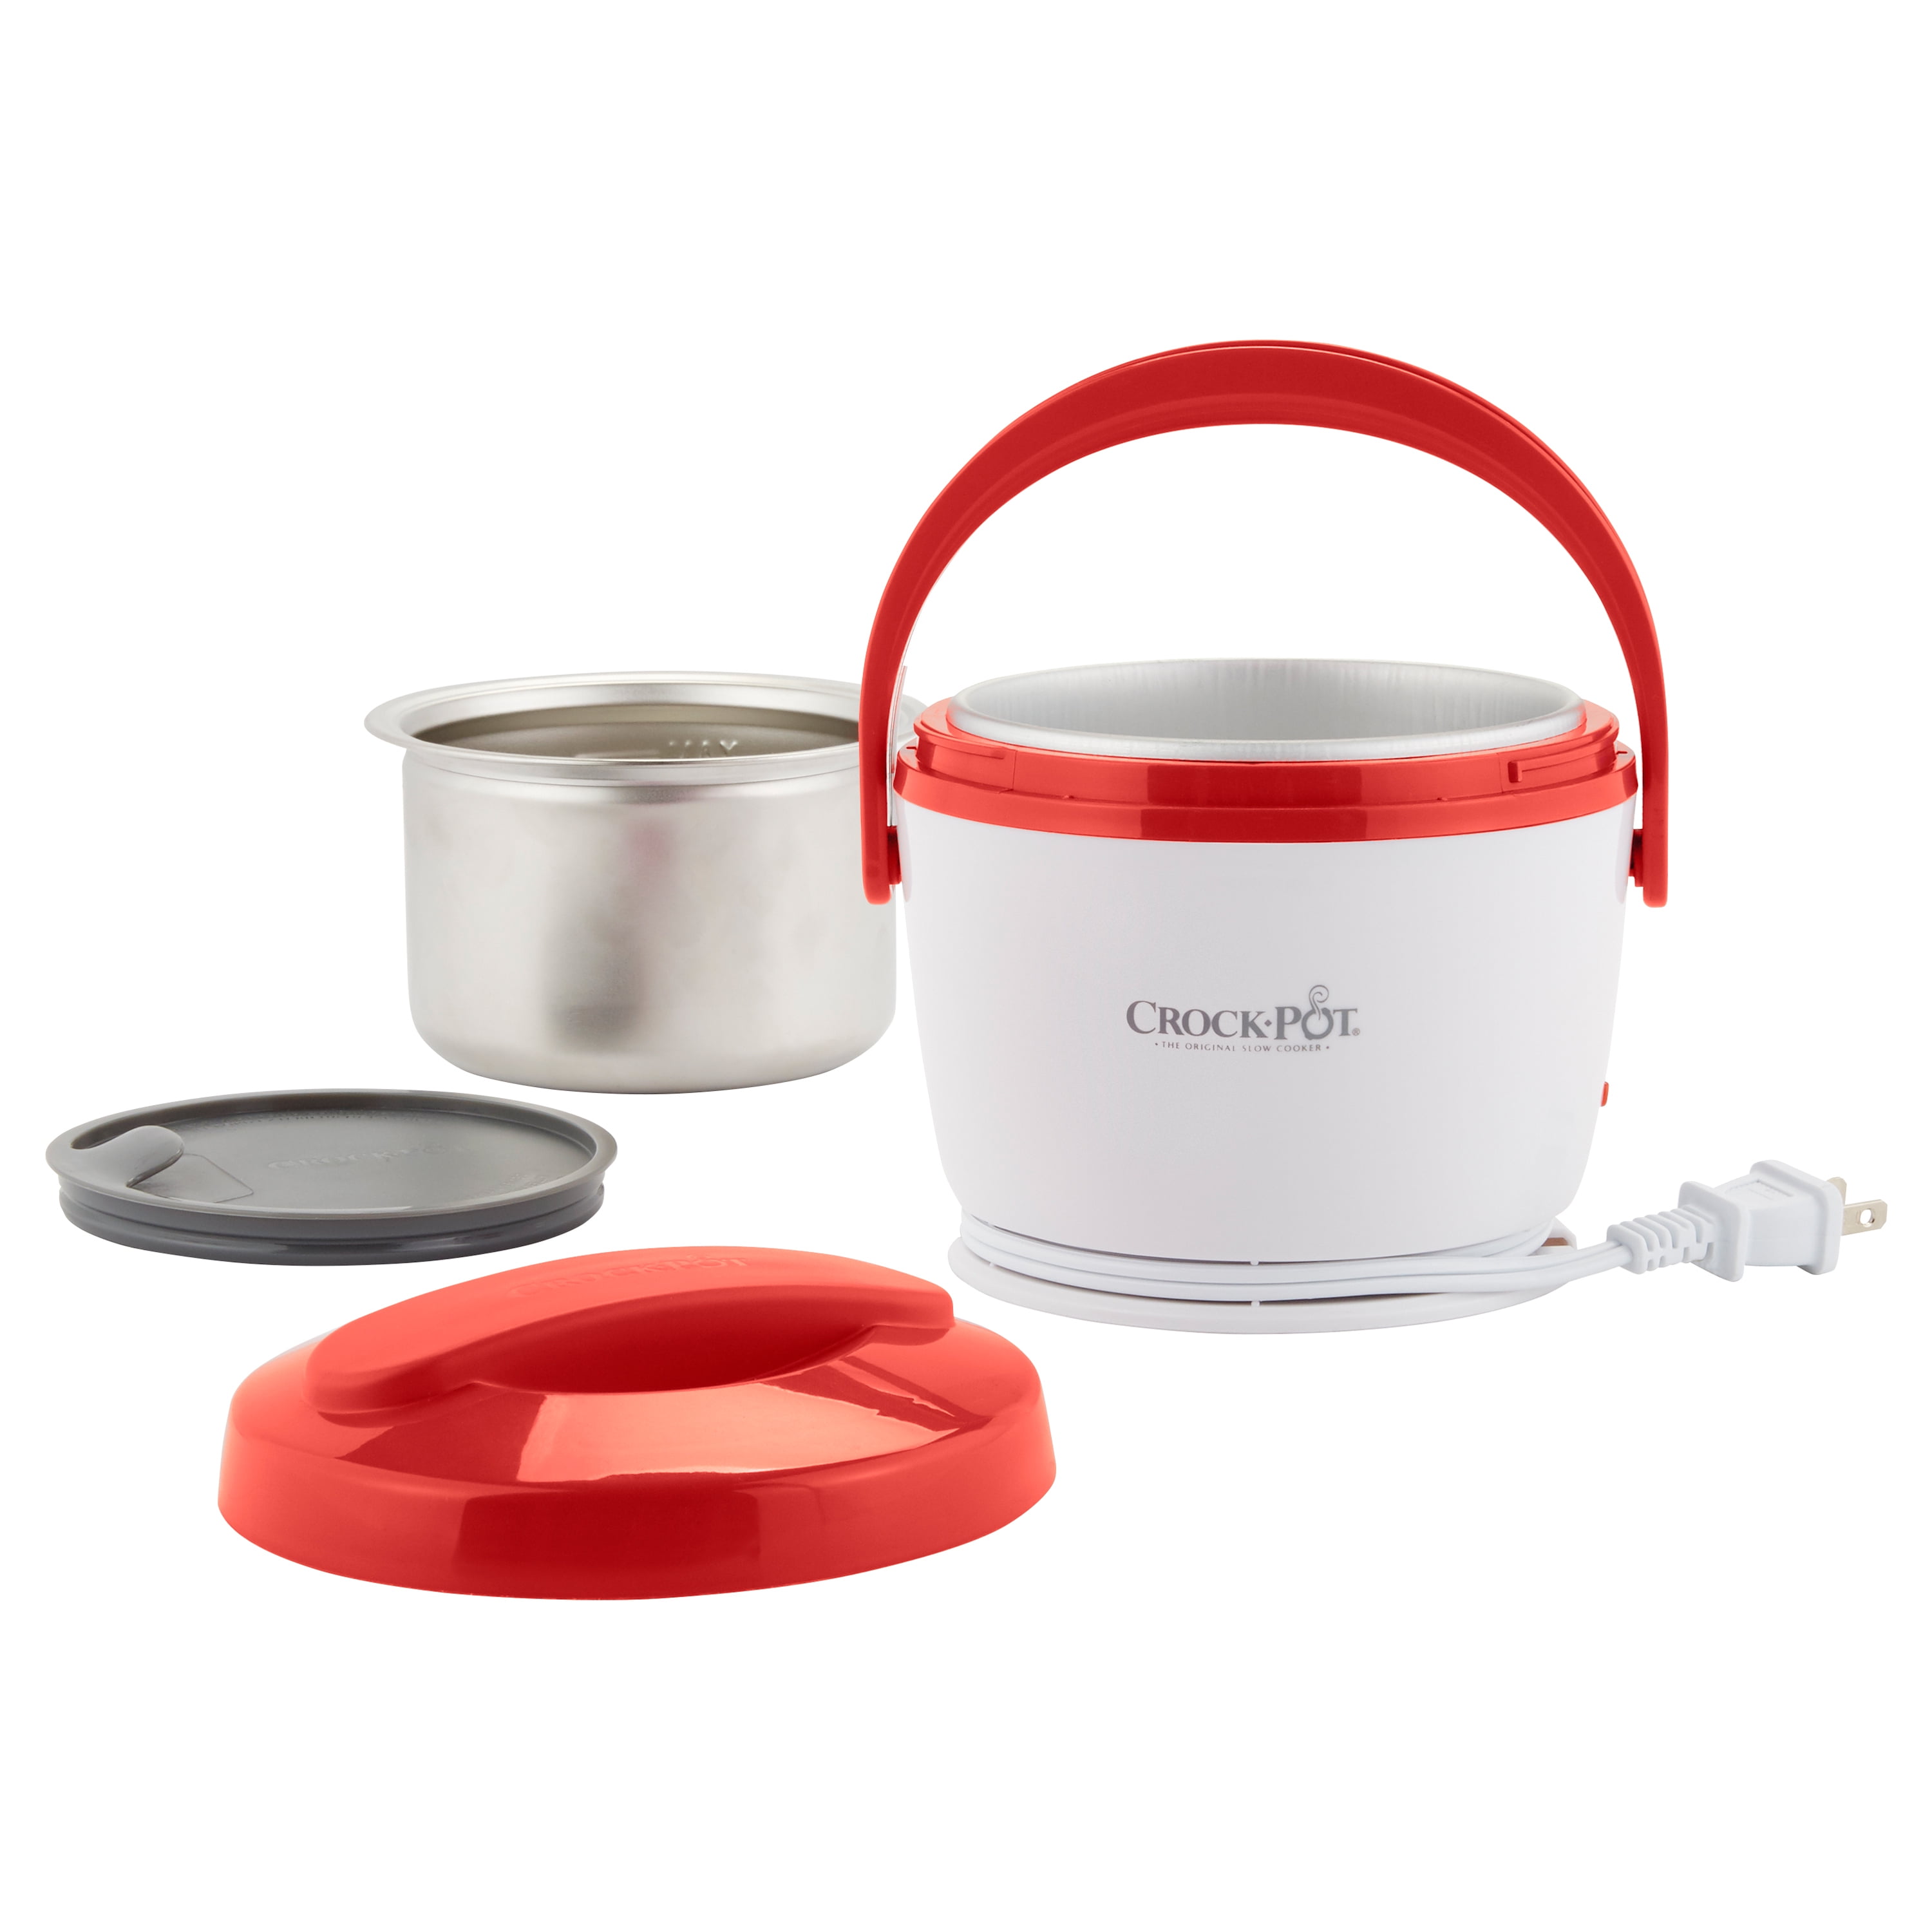 The Crock-Pot Lunch Crock Food Warmer Tested and Reviewed